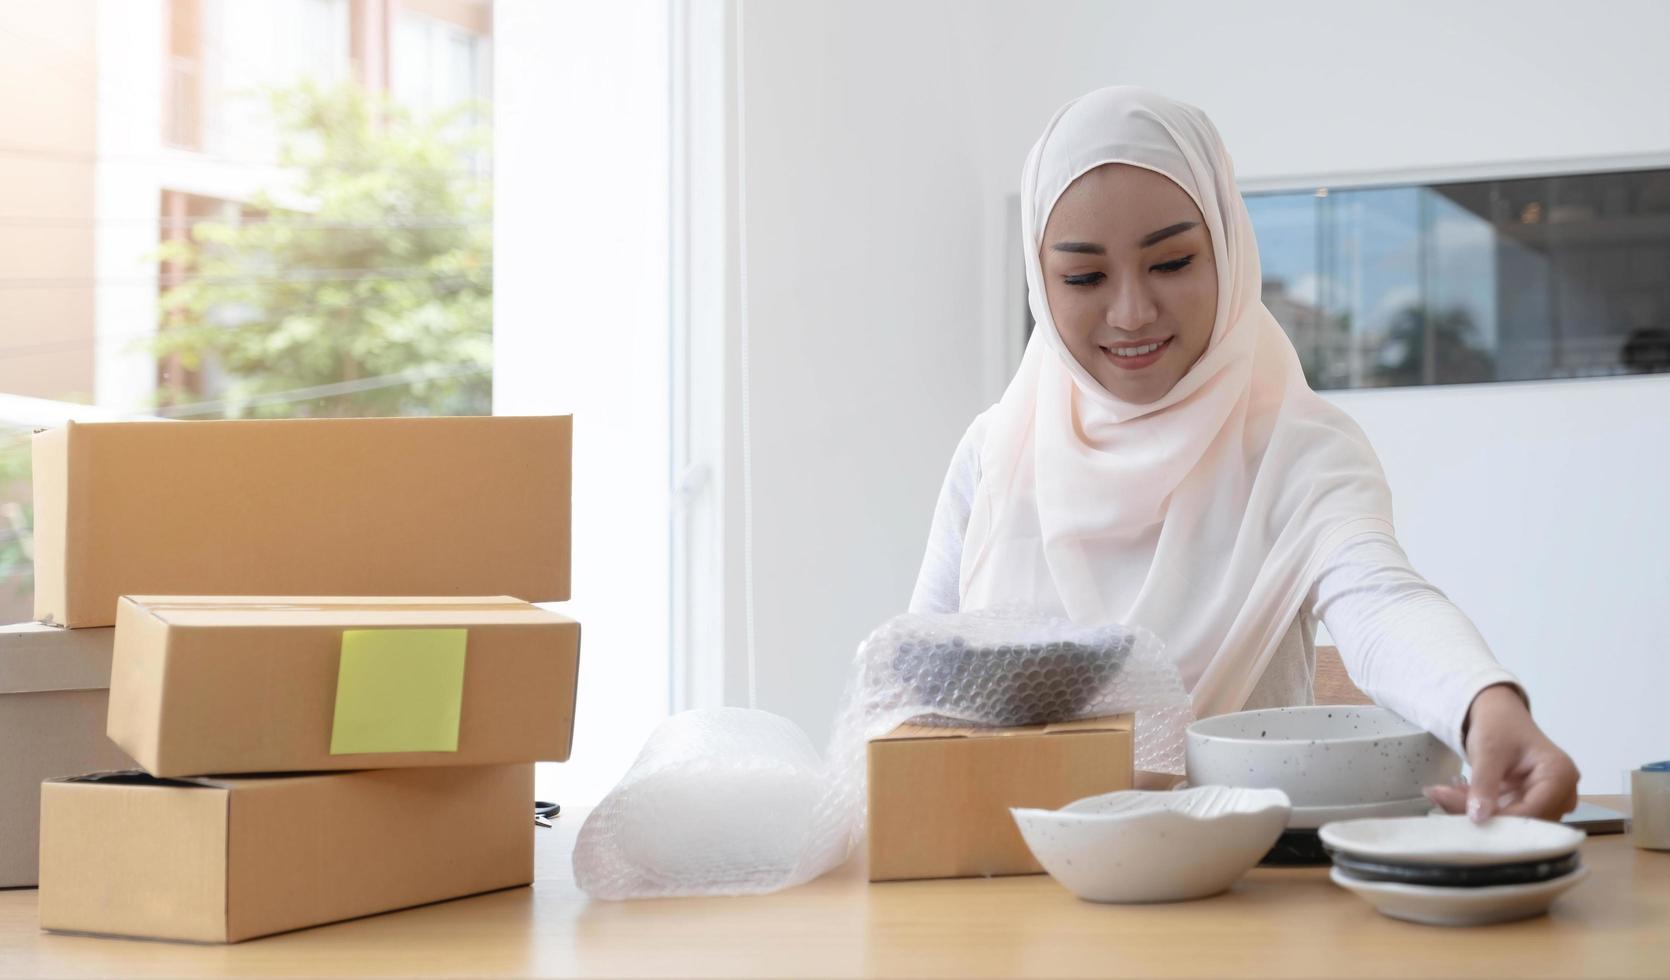 Muslim Business owner woman working online shopping prepare product packaging process at the office, young entrepreneur concept. photo